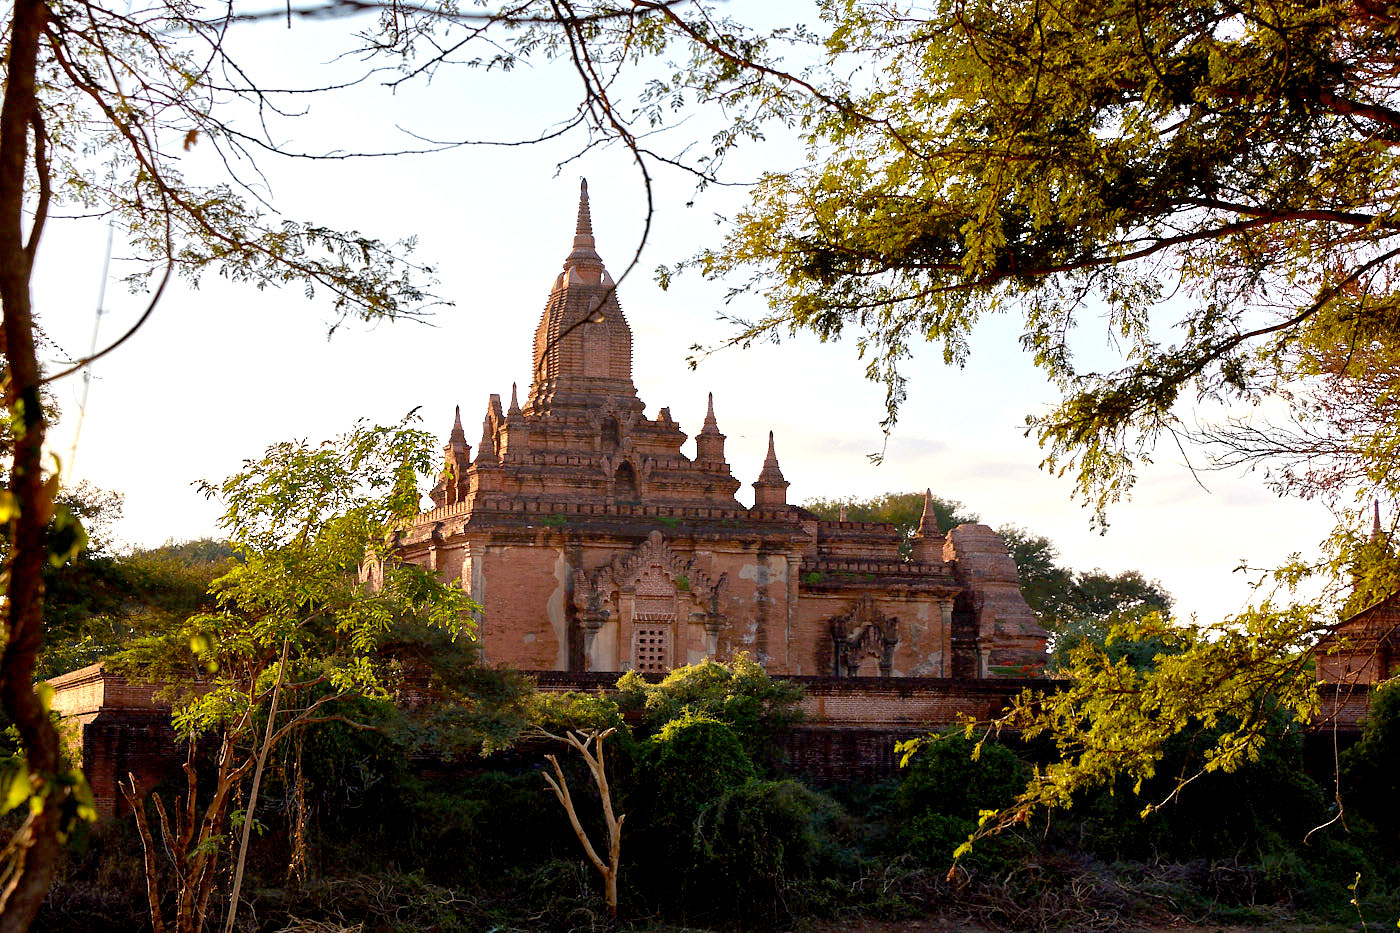 Bagan listed as World Heritage site by UNESCO